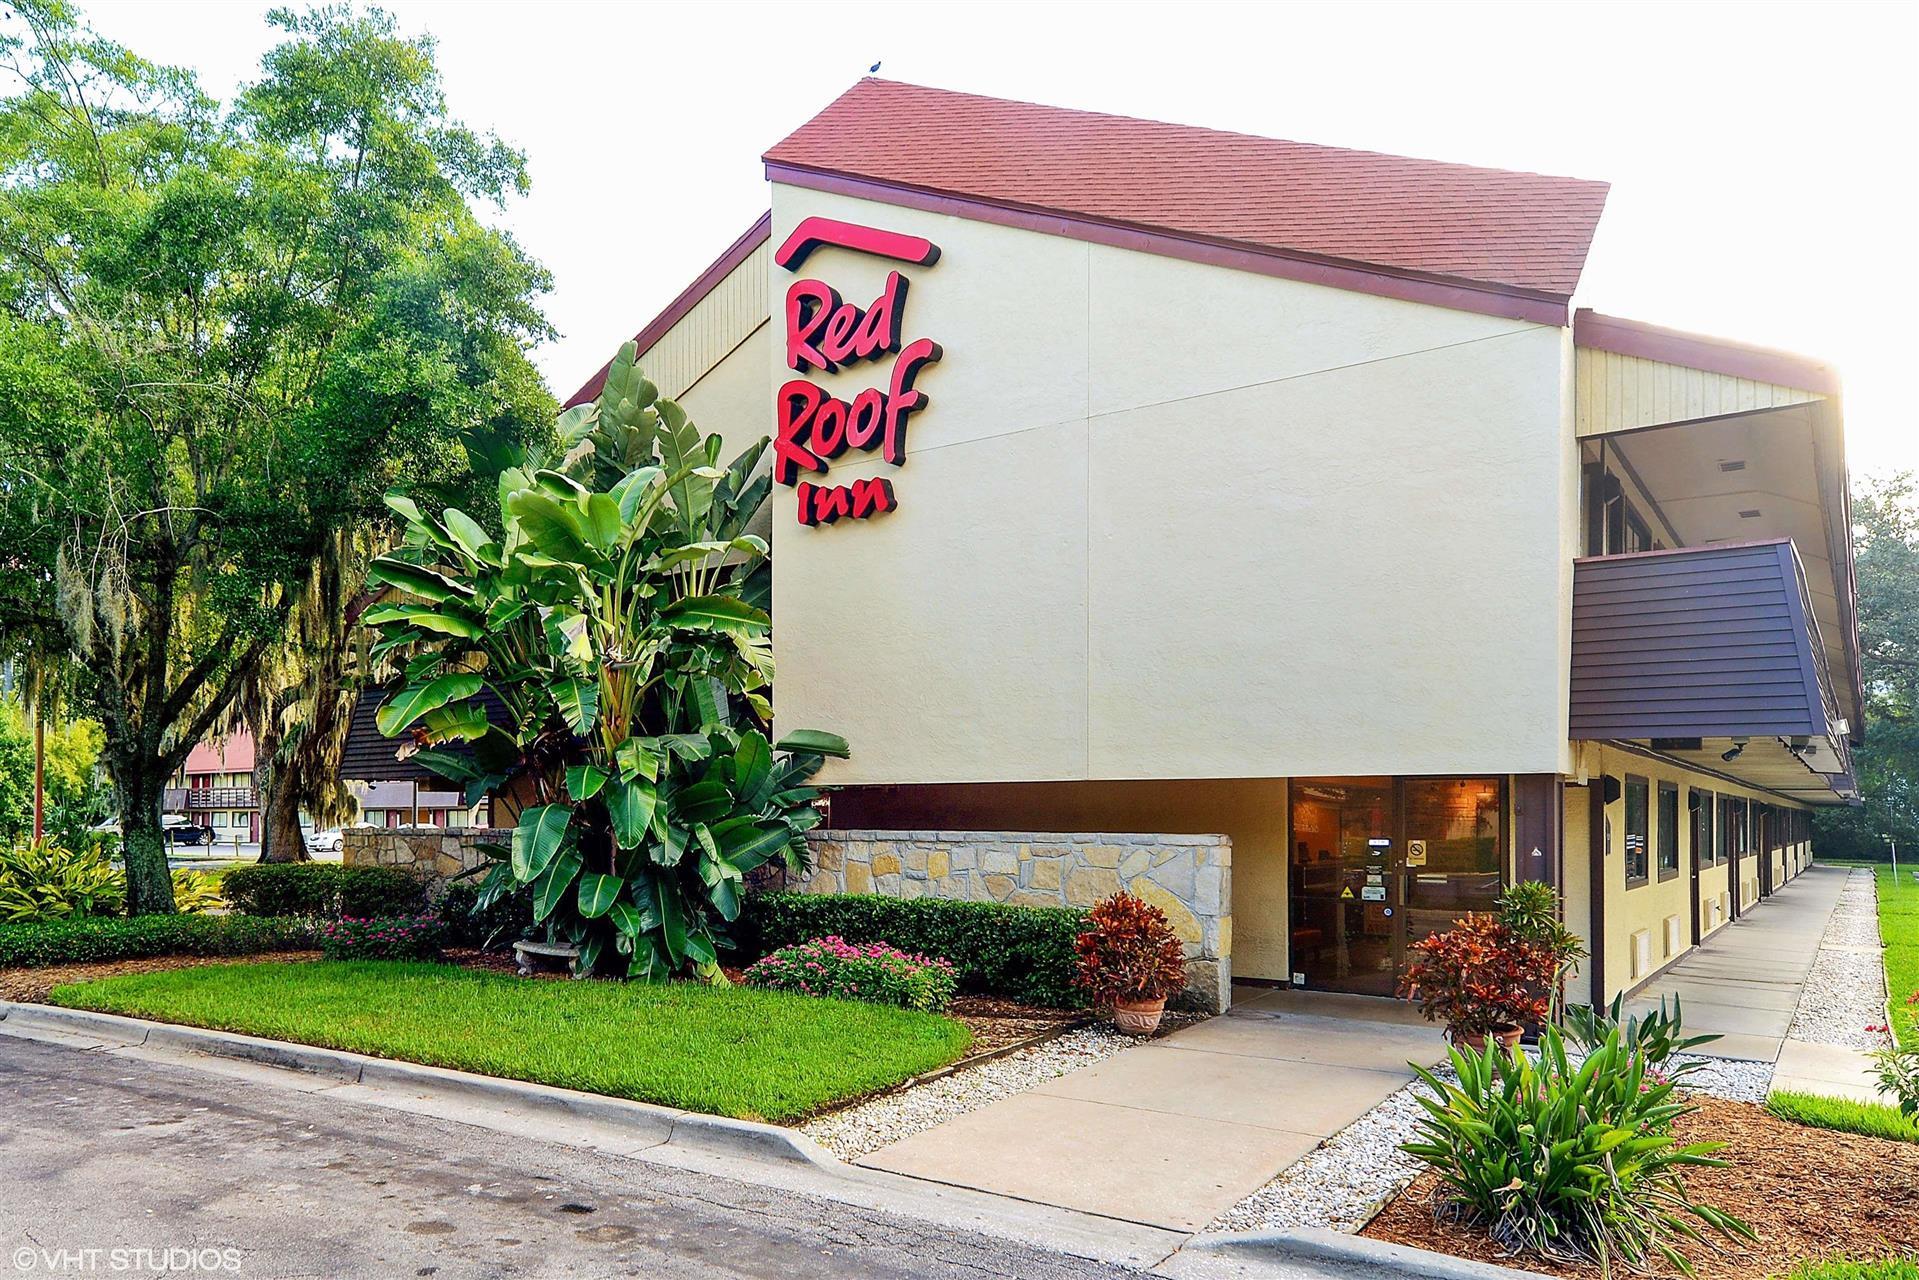 Red Roof Inn Tampa Fairgrounds - Casino in Tampa, FL